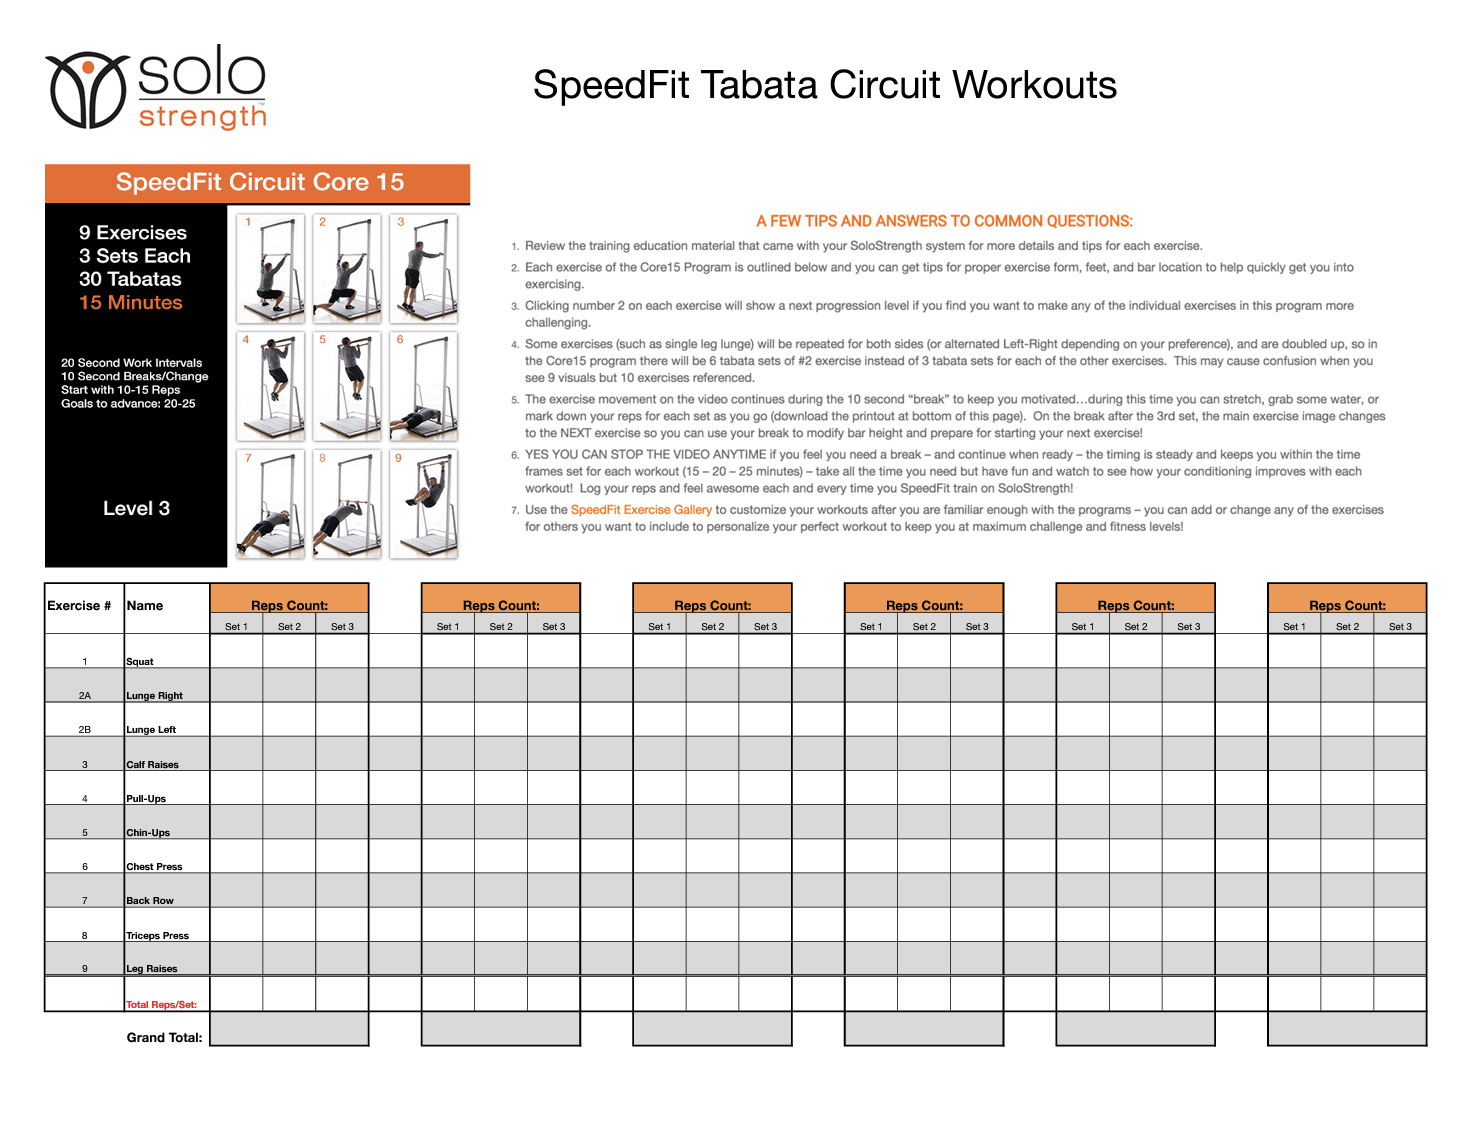 speedfit tabata circuit workout bodyweight exercise program for home gym